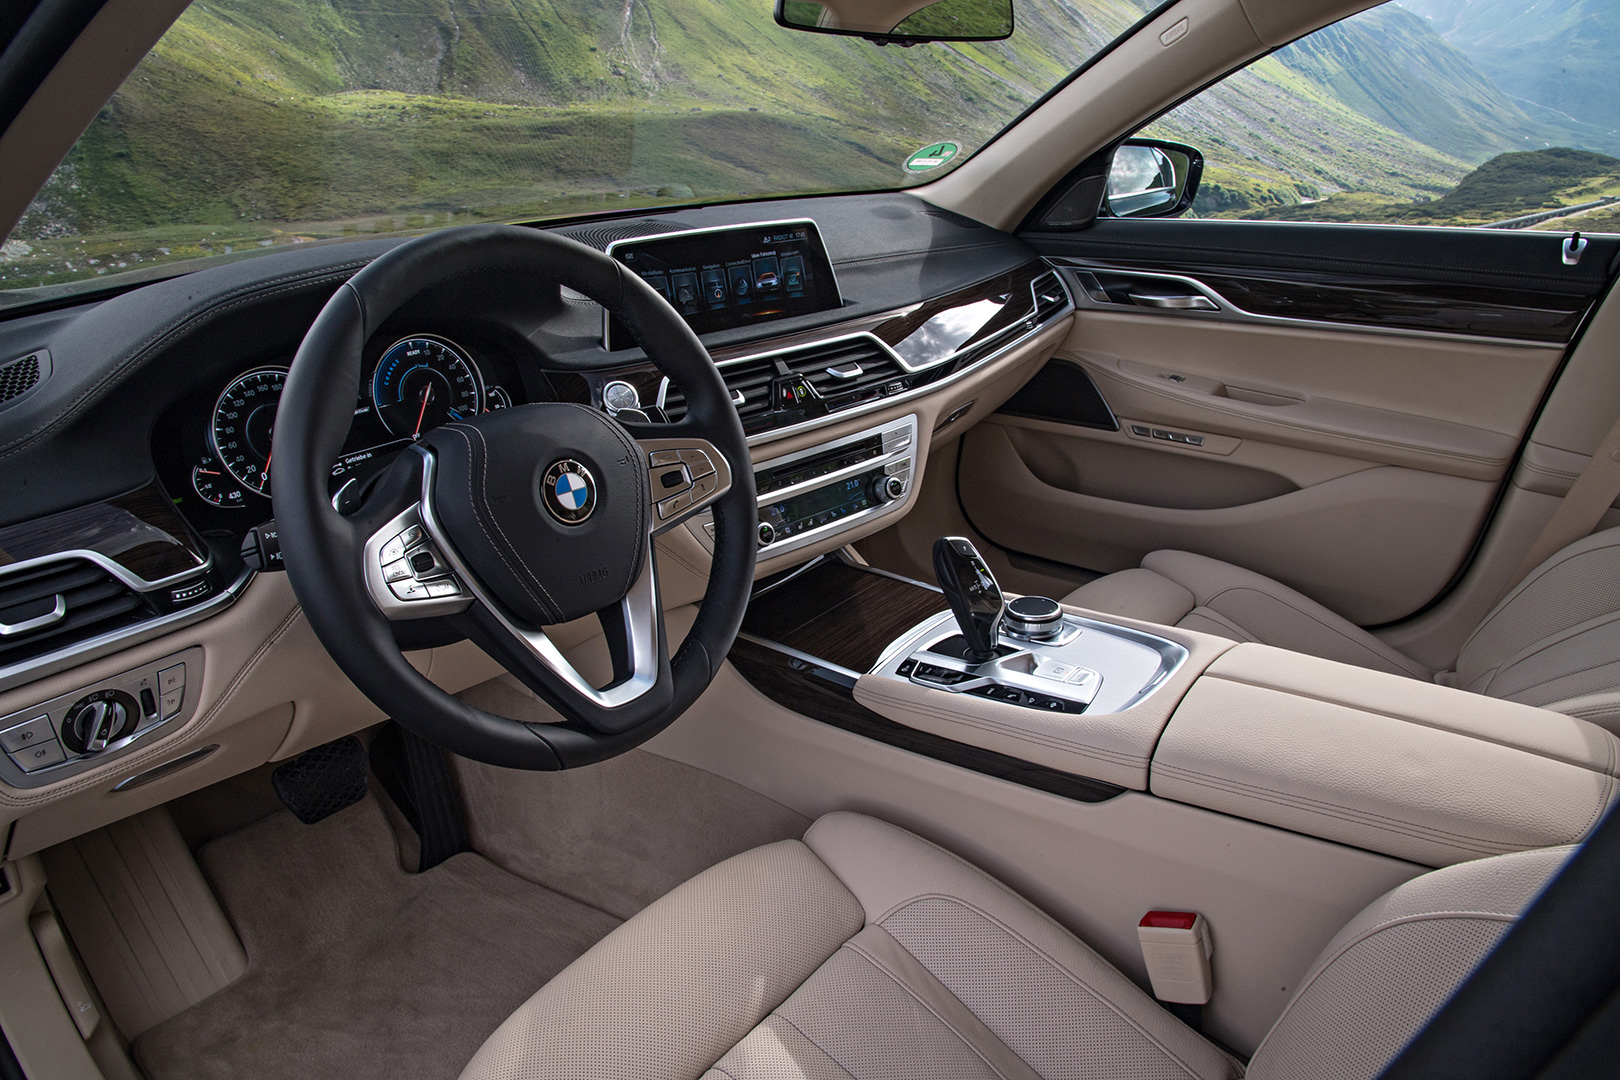 2018 BMW 740e xDrive iPerformance Hybrid Review: Plug It in for 10 to 14  Miles of Electric Range